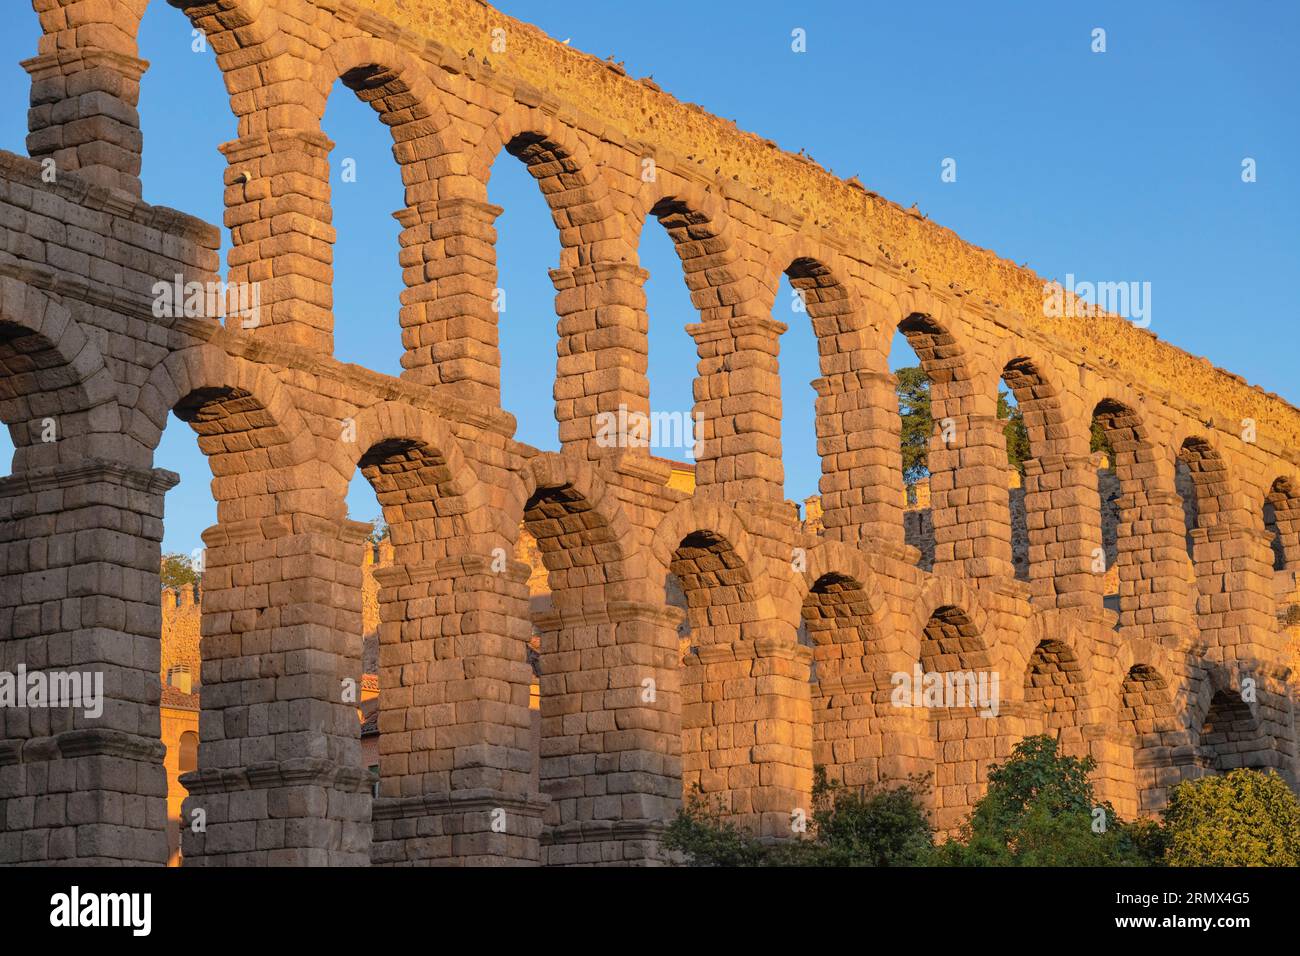 Spain, Castile and Leon, Segovia, Early morning golden light on the Aqueduct of Segovia, a Roman aqueduct with 167 arches built around the first centu Stock Photo